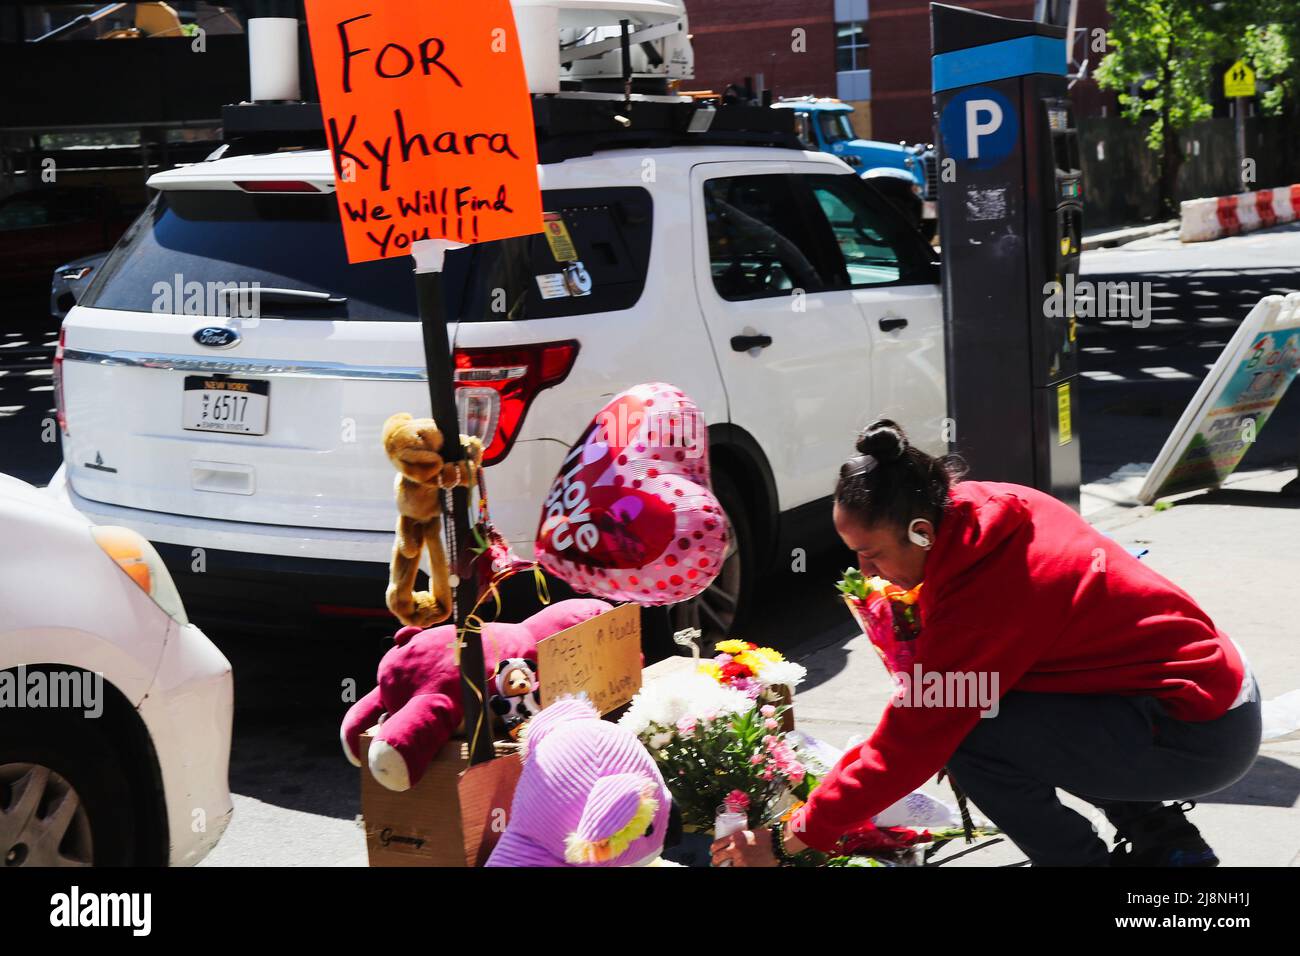 Sidewalk Memorial for 11-Year-Old Killed in Shooting, New York, NY USA Stock Photo